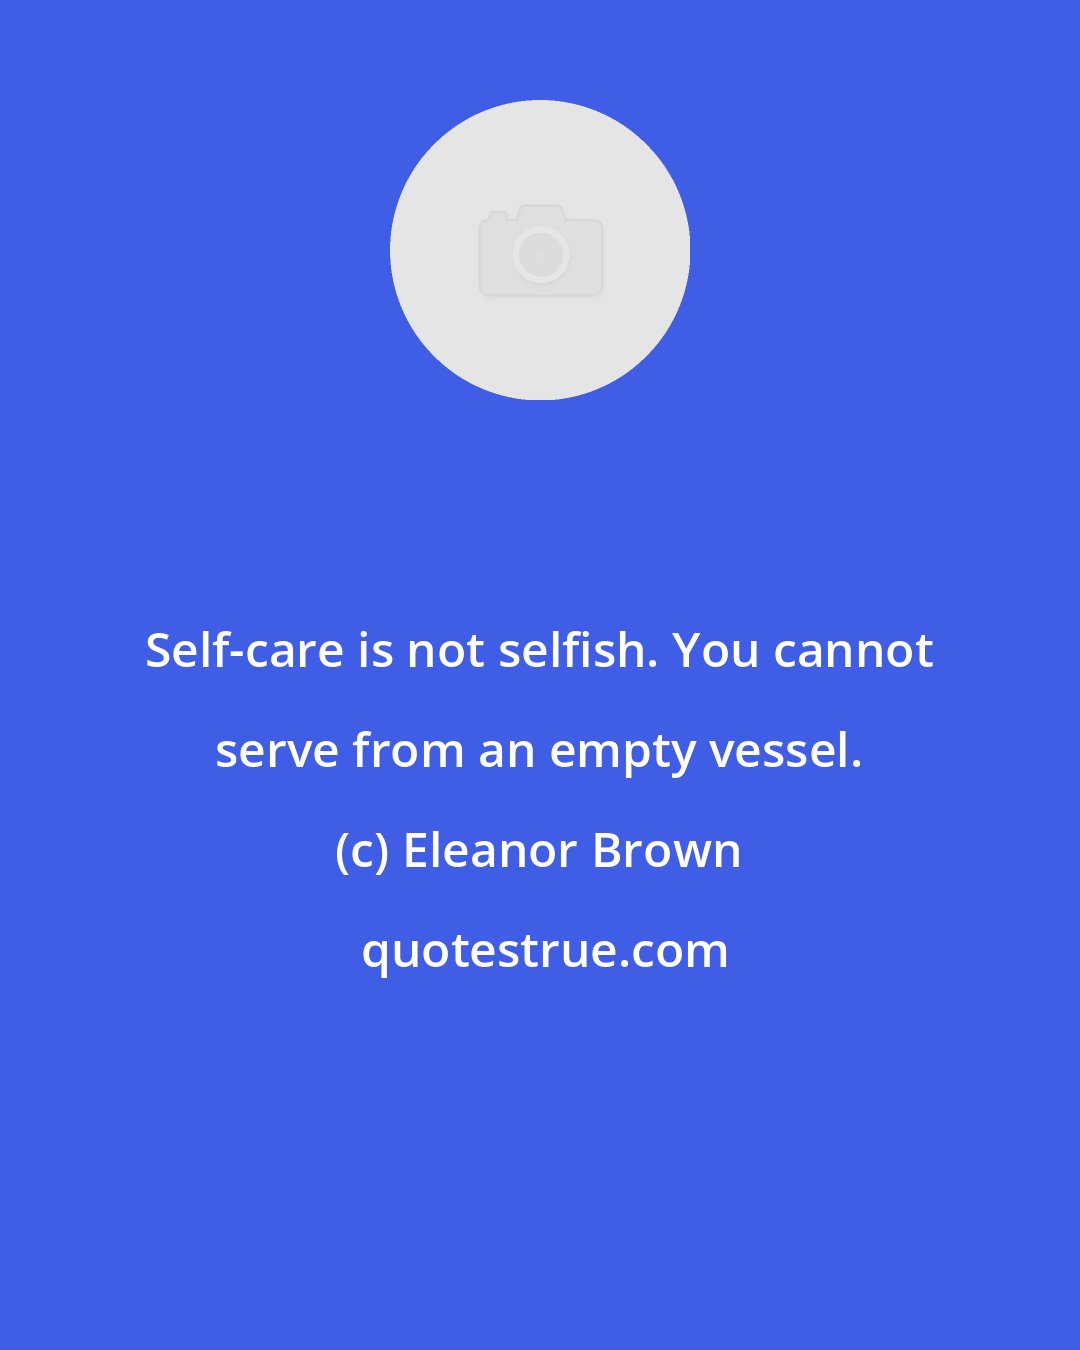 Eleanor Brown: Self-care is not selfish. You cannot serve from an empty vessel.